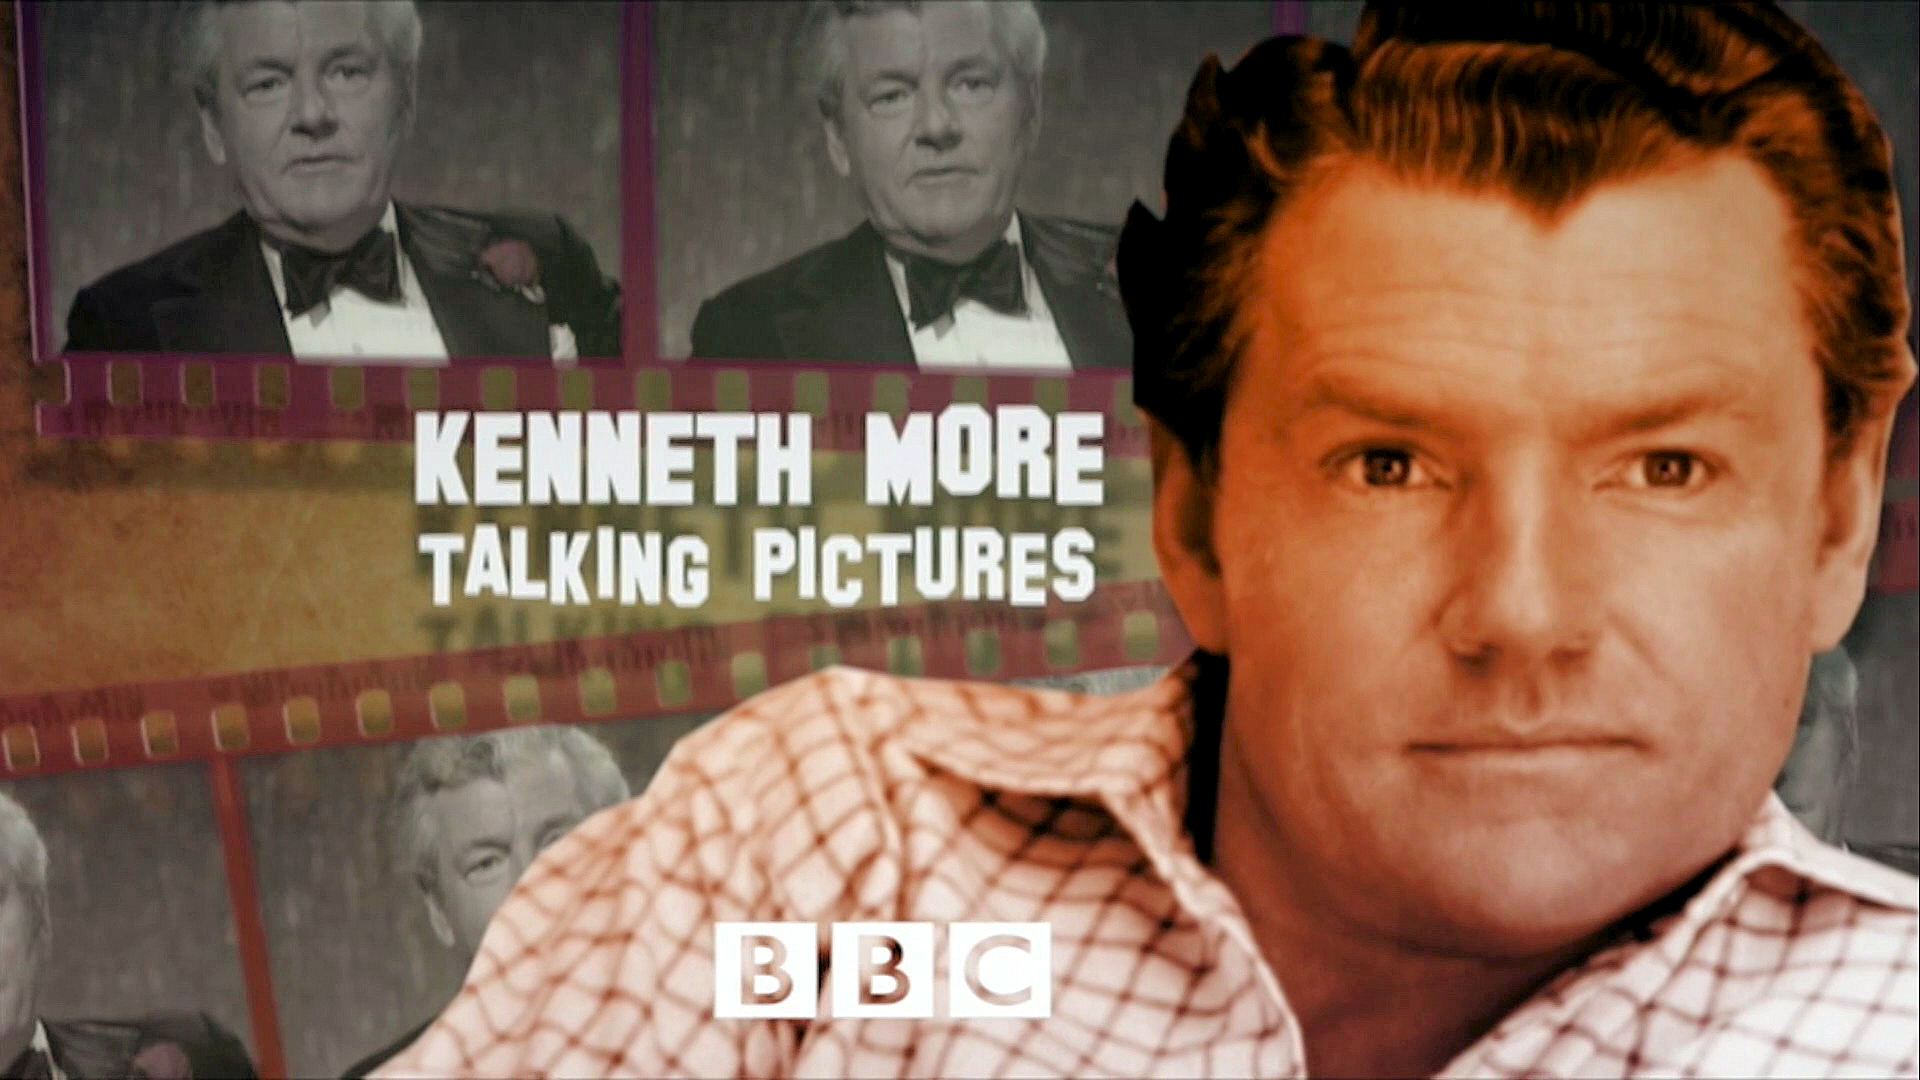 Main title from the 2015 ‘Kenneth More’ episode of Talking Pictures (2013) featuring Kenneth More